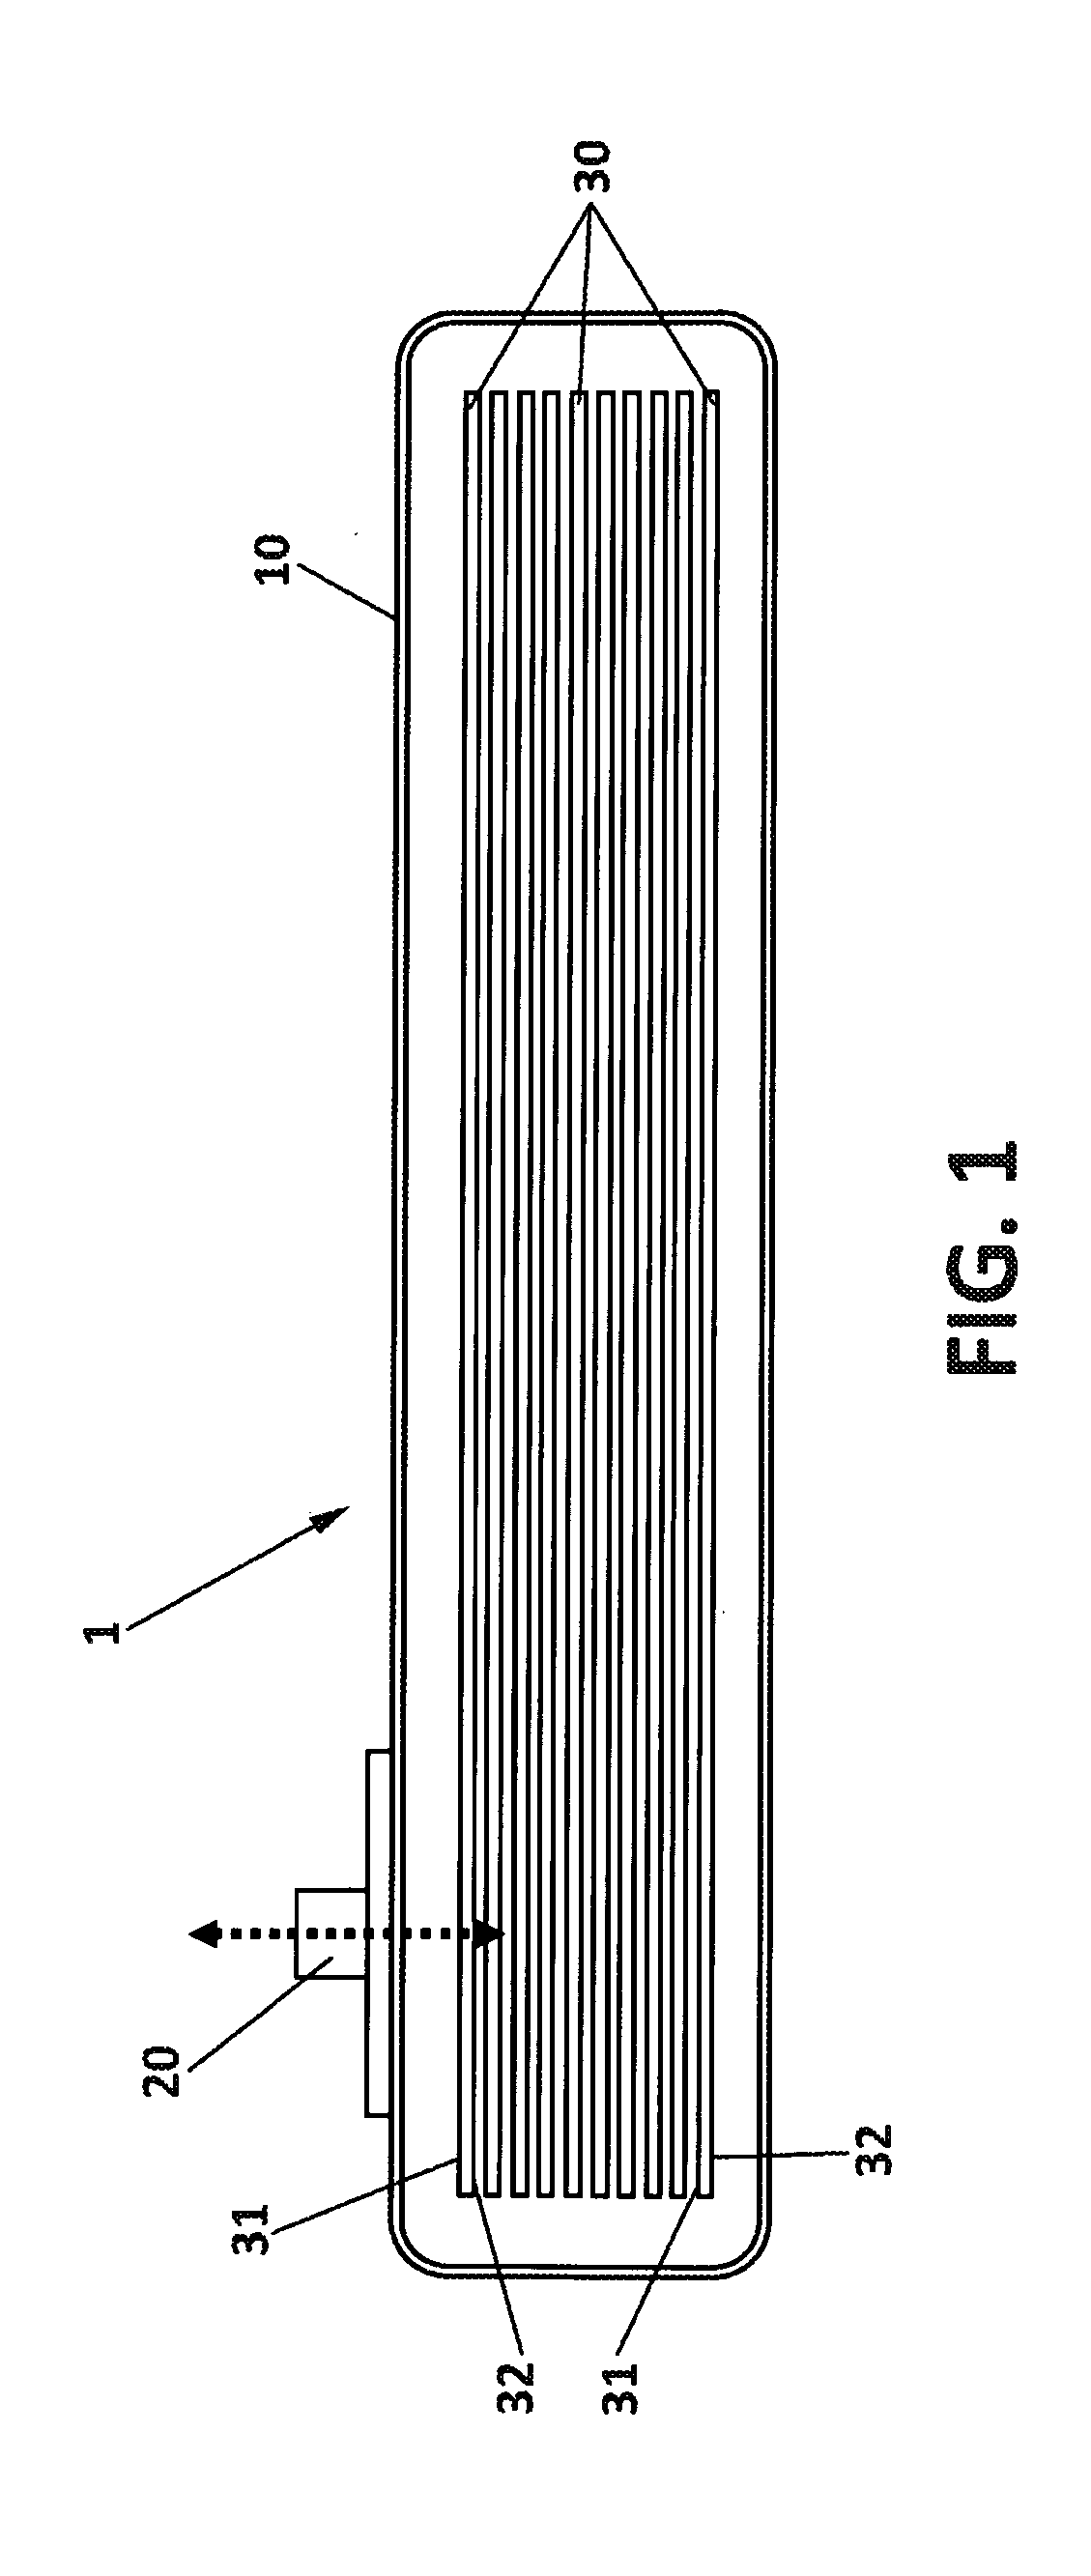 Element with variable stiffness controlled by negative pressure